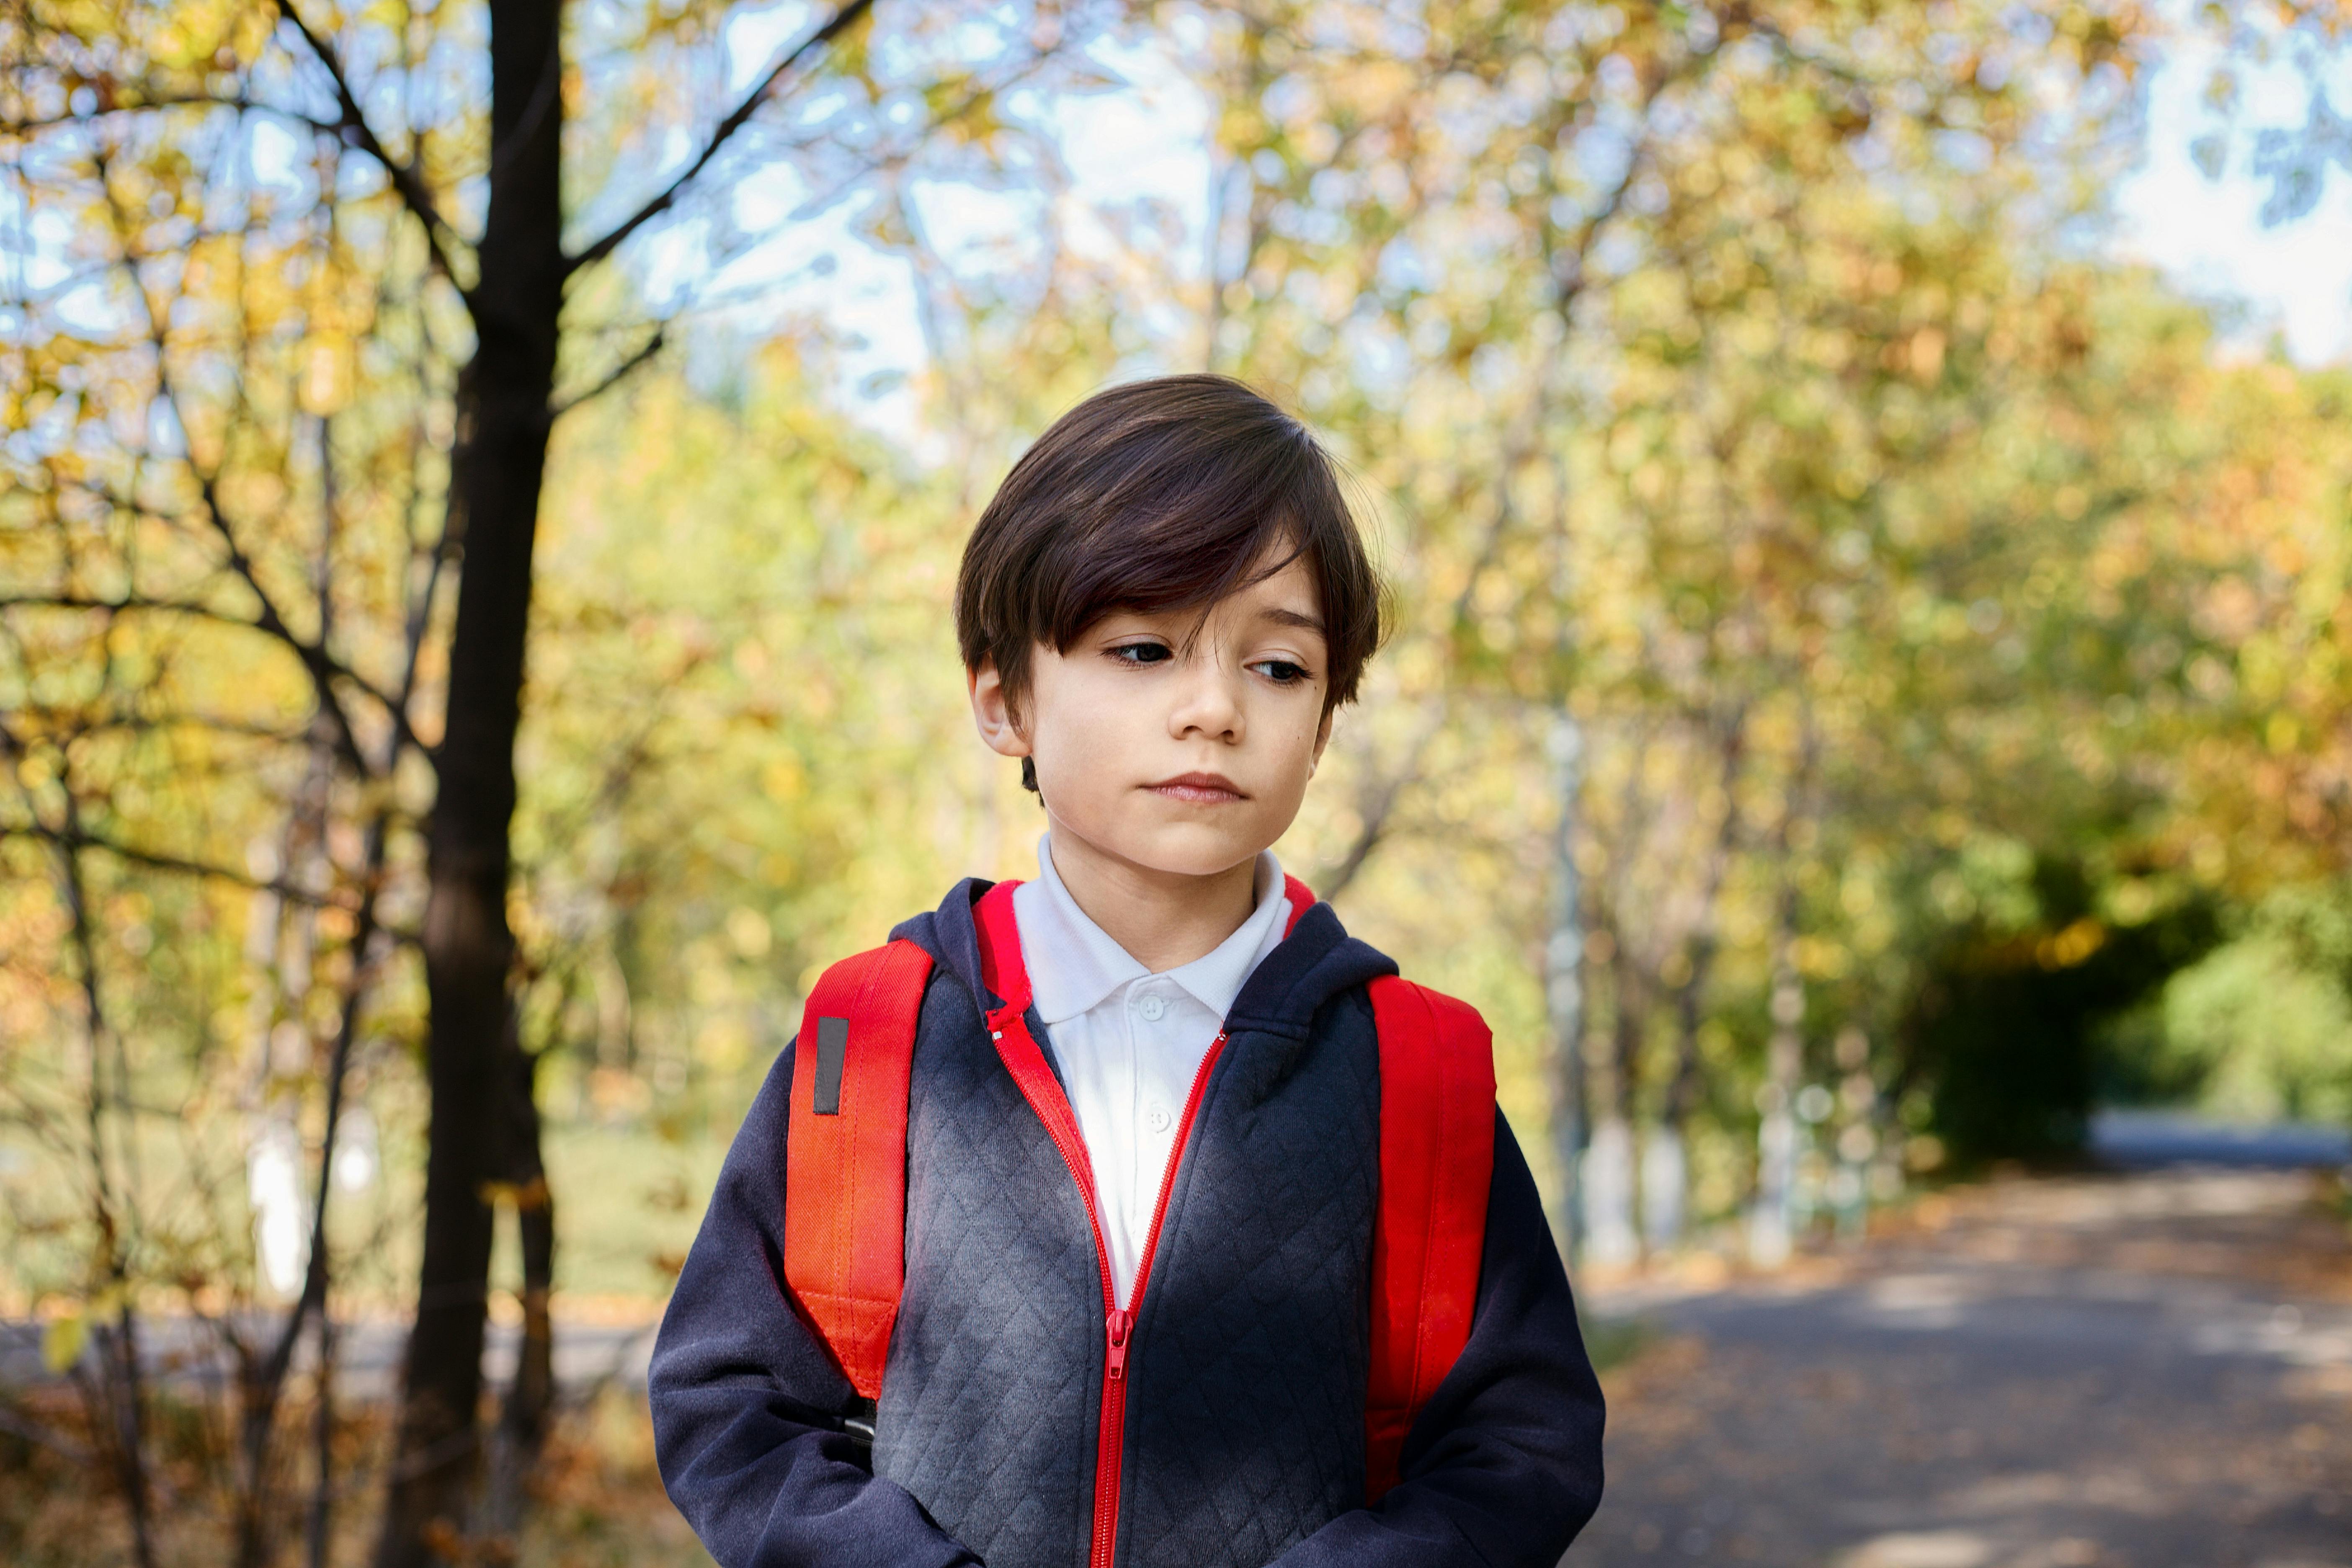 A young boy stands somber in a park. | Photo: Pexels